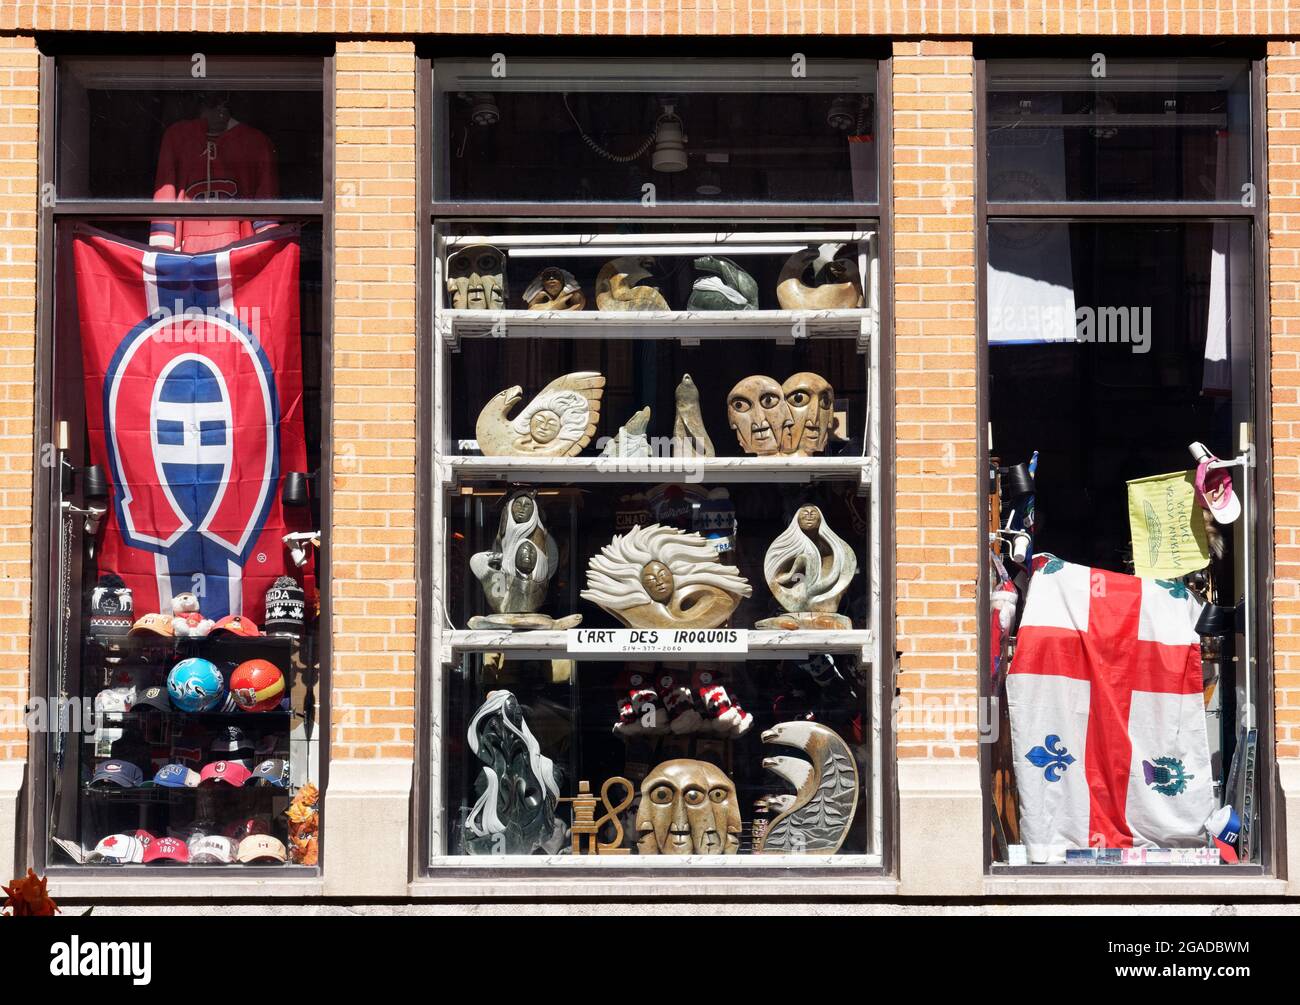 Iroquois Amerindian art and sculpture in a shop window in Montreal, Quebec, Canada Stock Photo